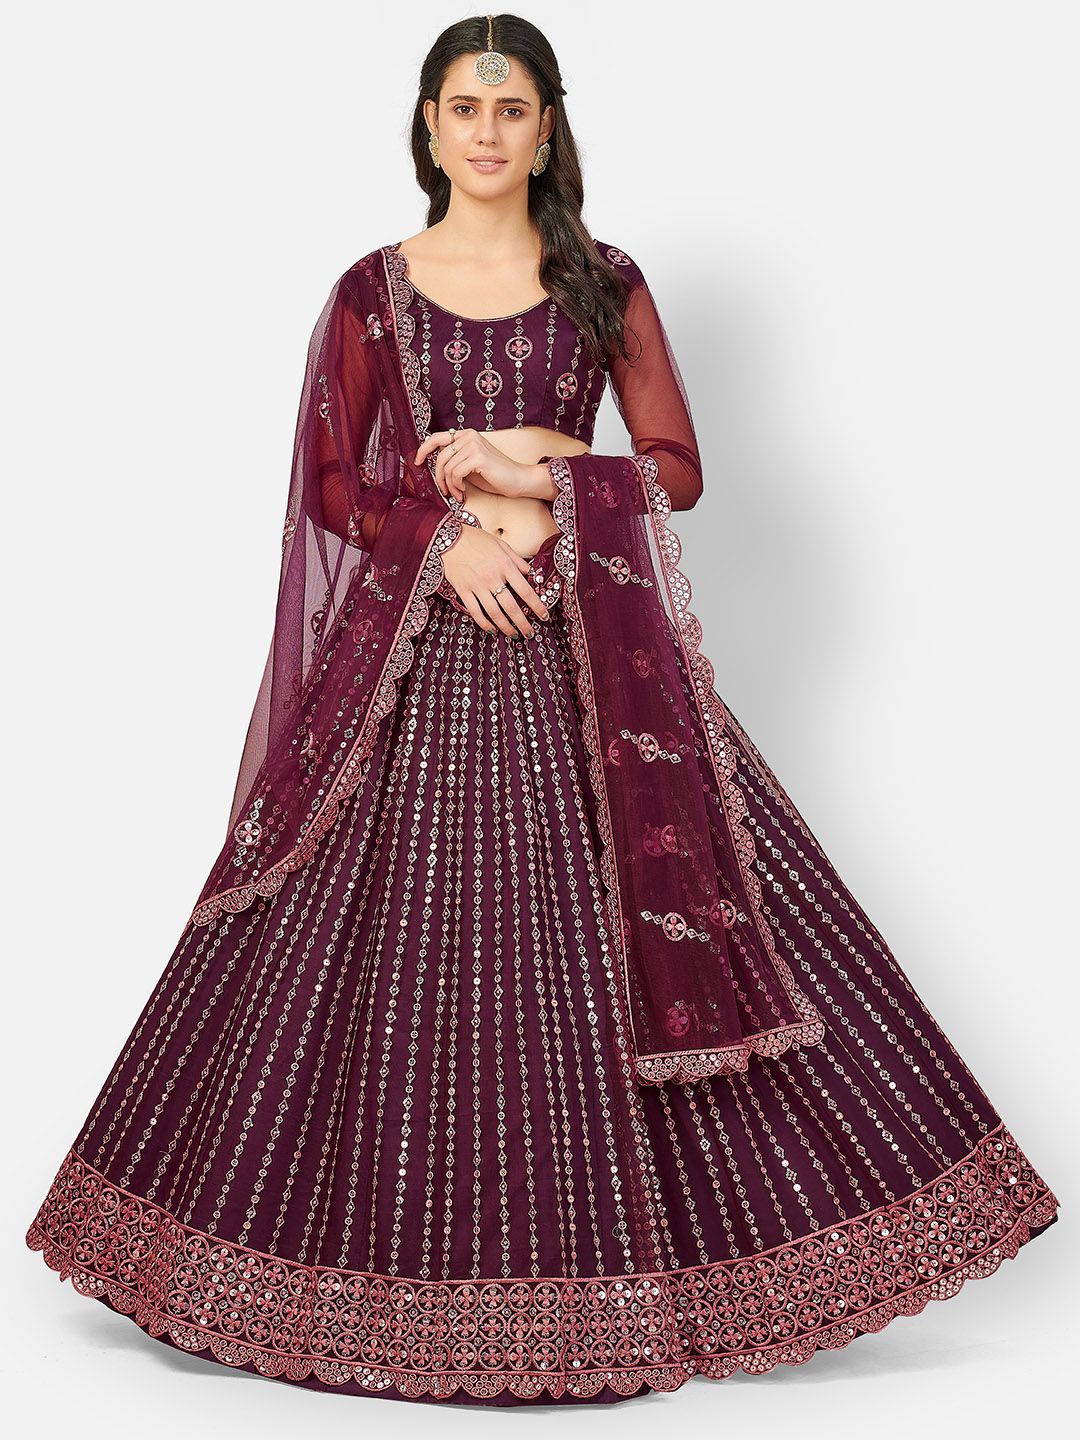 SHOPGARB Maroon Embroidered Semi-Stitched Lehenga & Unstitched Blouse With Dupatta Price in India